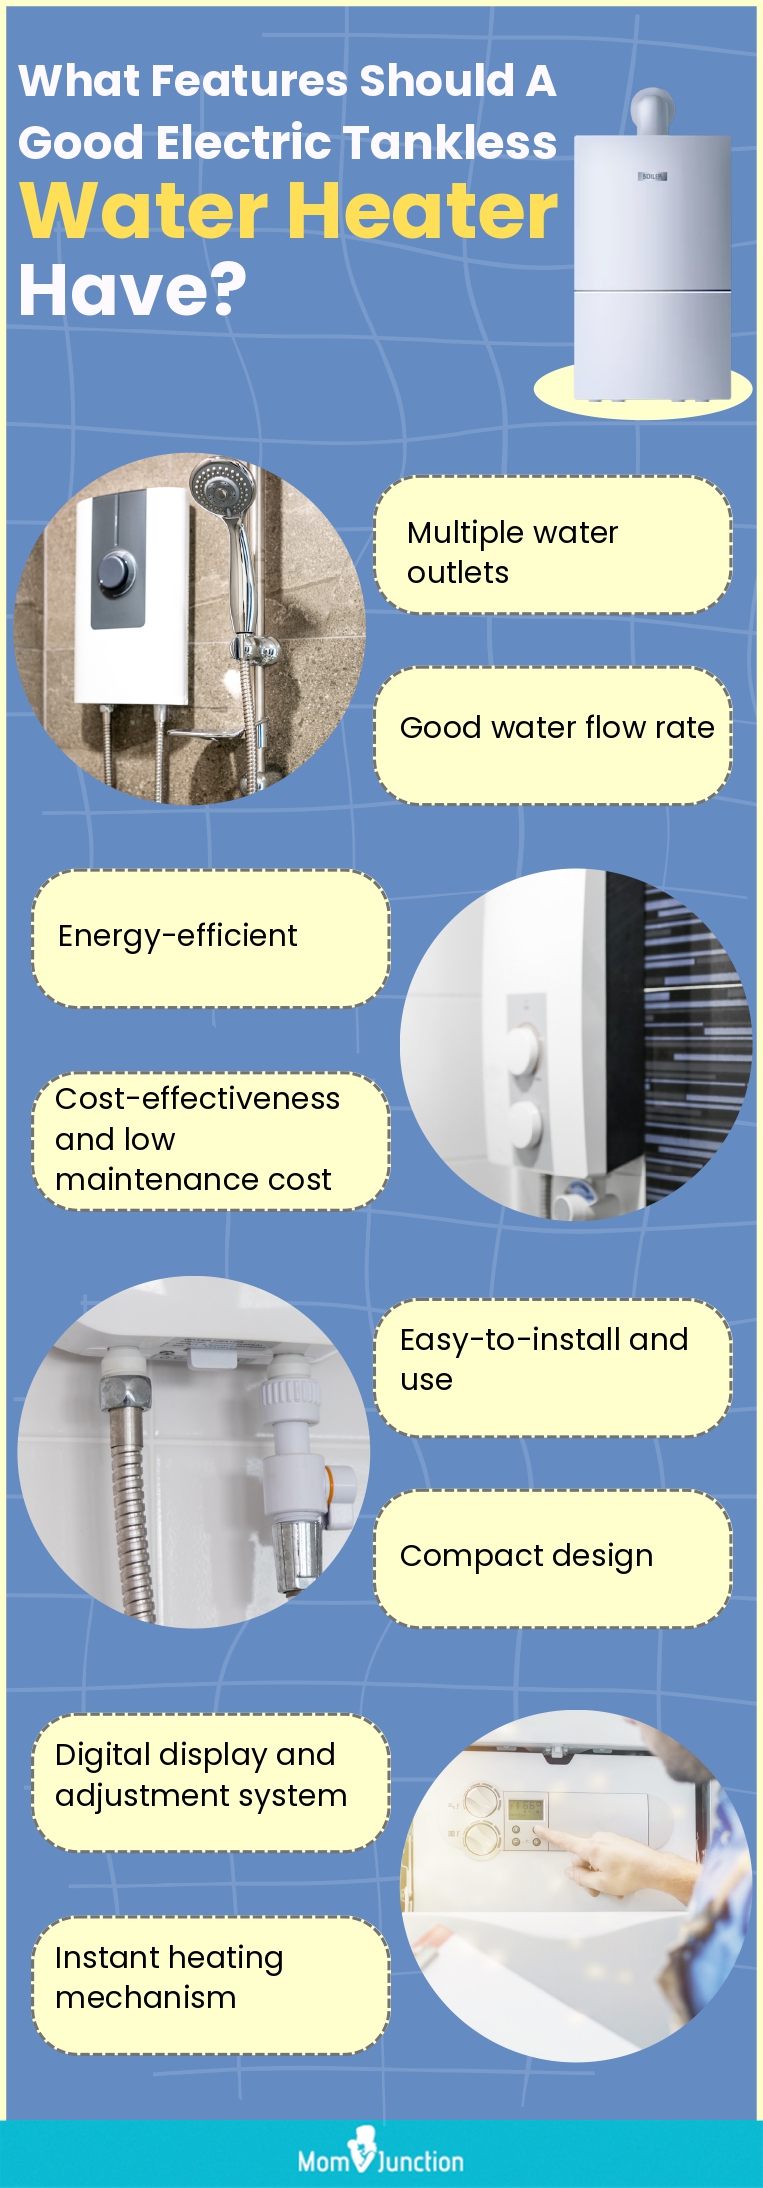 What Features Should A Good Electric Tankless Water Heater Have (infographic)